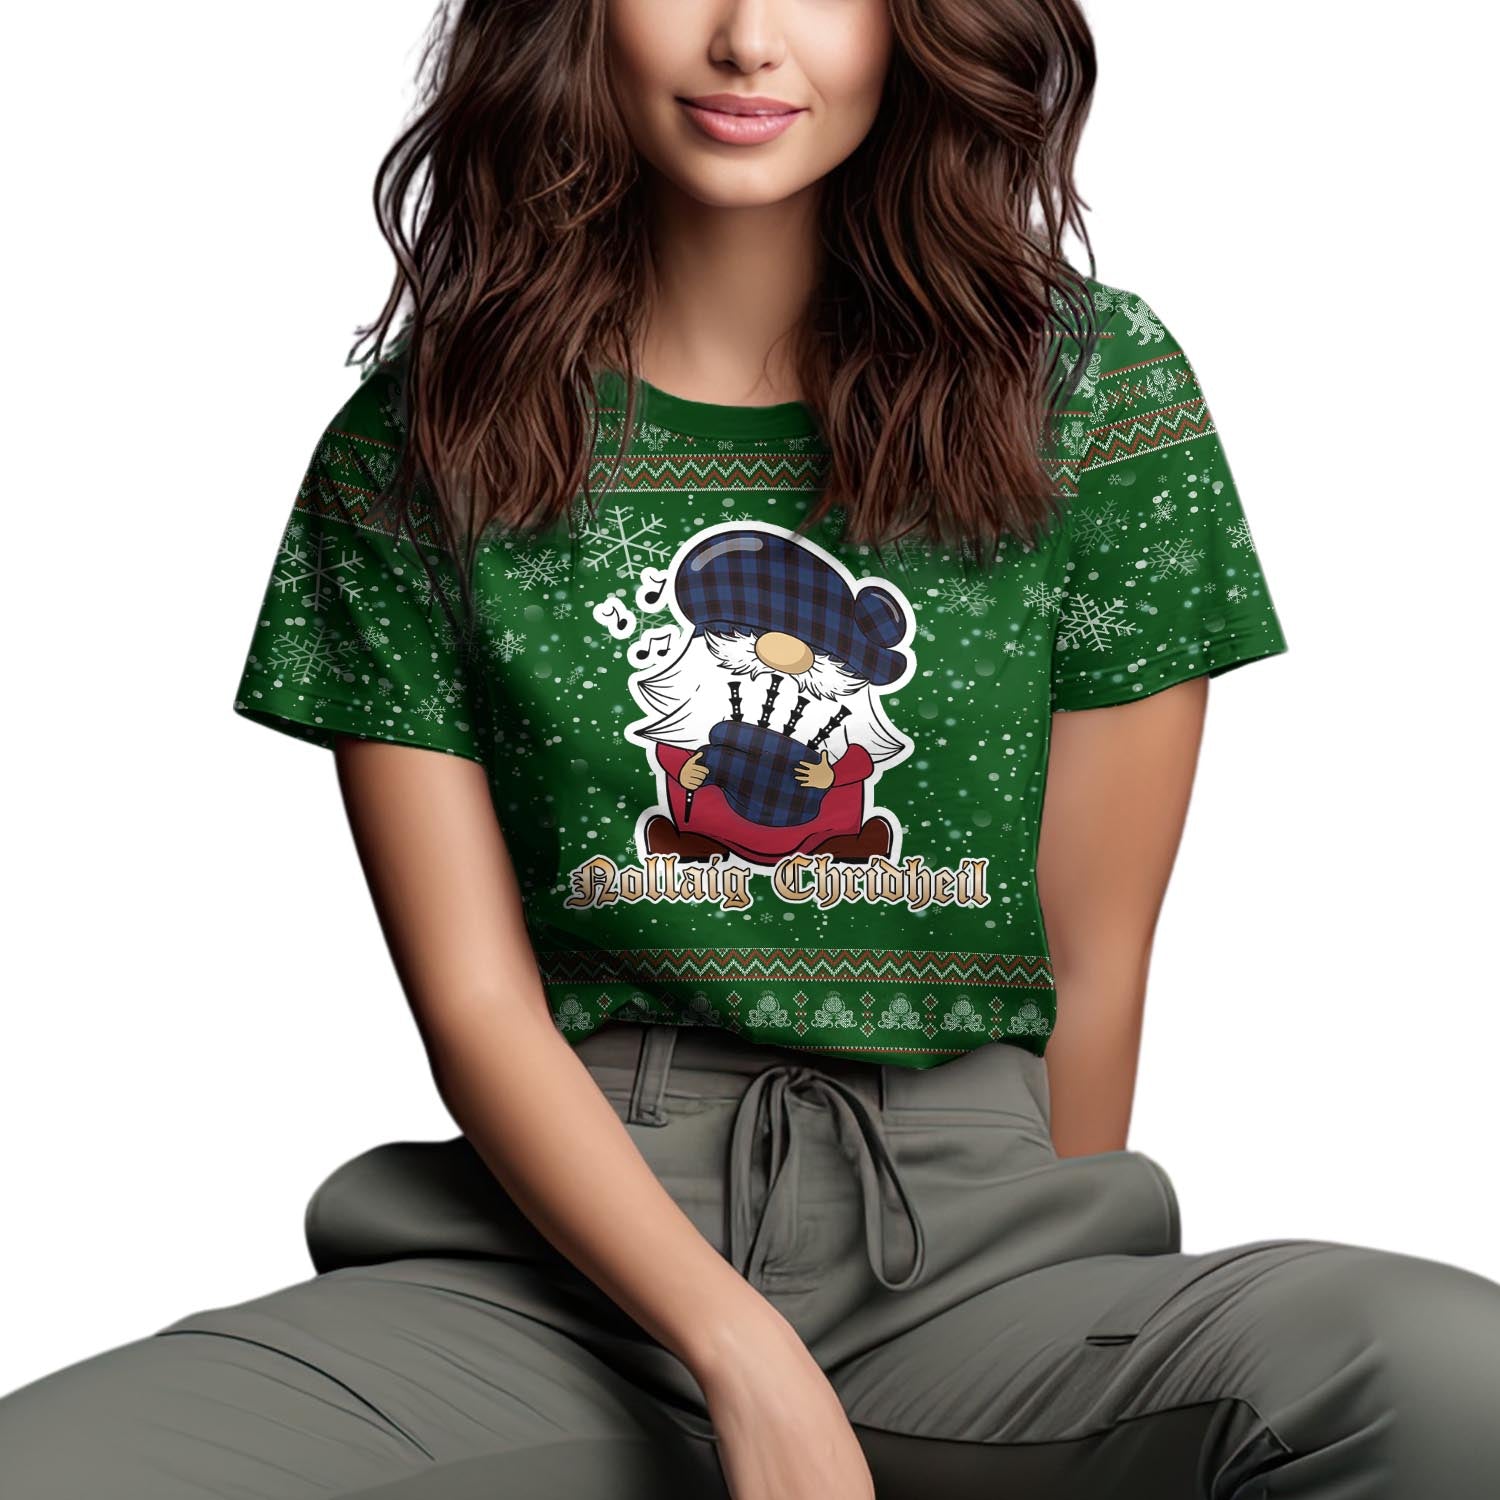 Home (Hume) Clan Christmas Family T-Shirt with Funny Gnome Playing Bagpipes Women's Shirt Green - Tartanvibesclothing